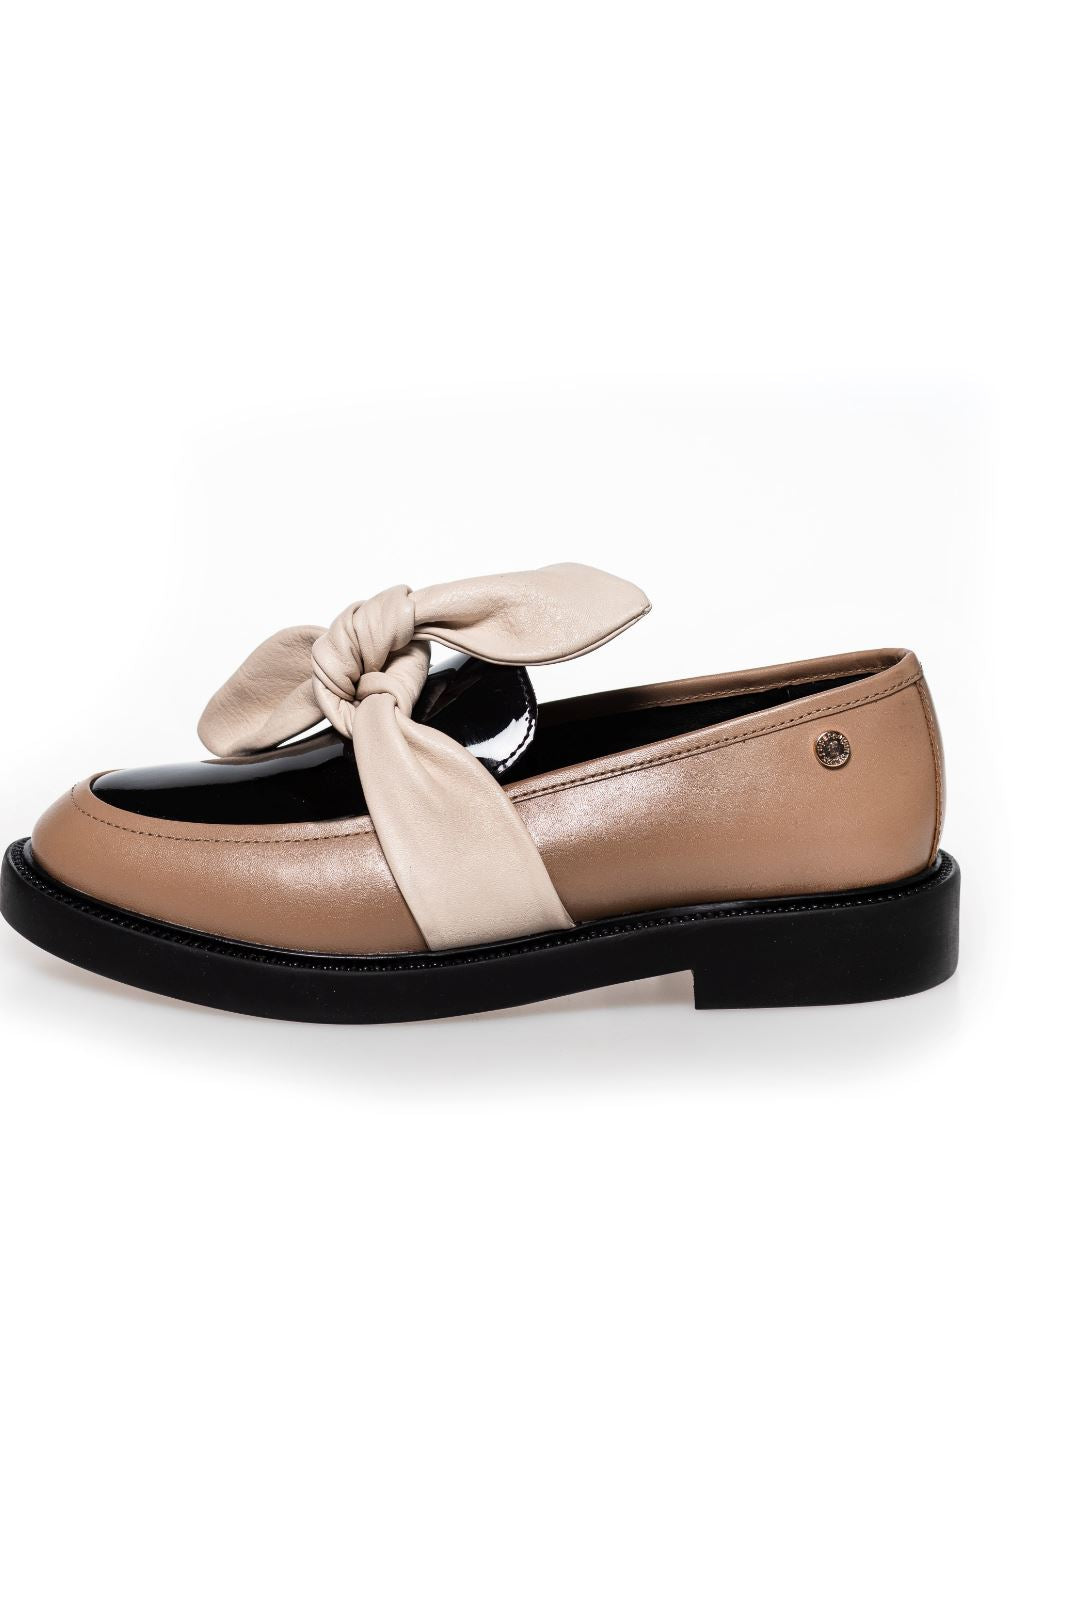 Copenhagen Shoes - Will You Walk Patent - 0025 Lt. Brown / Black / Nude Loafers 